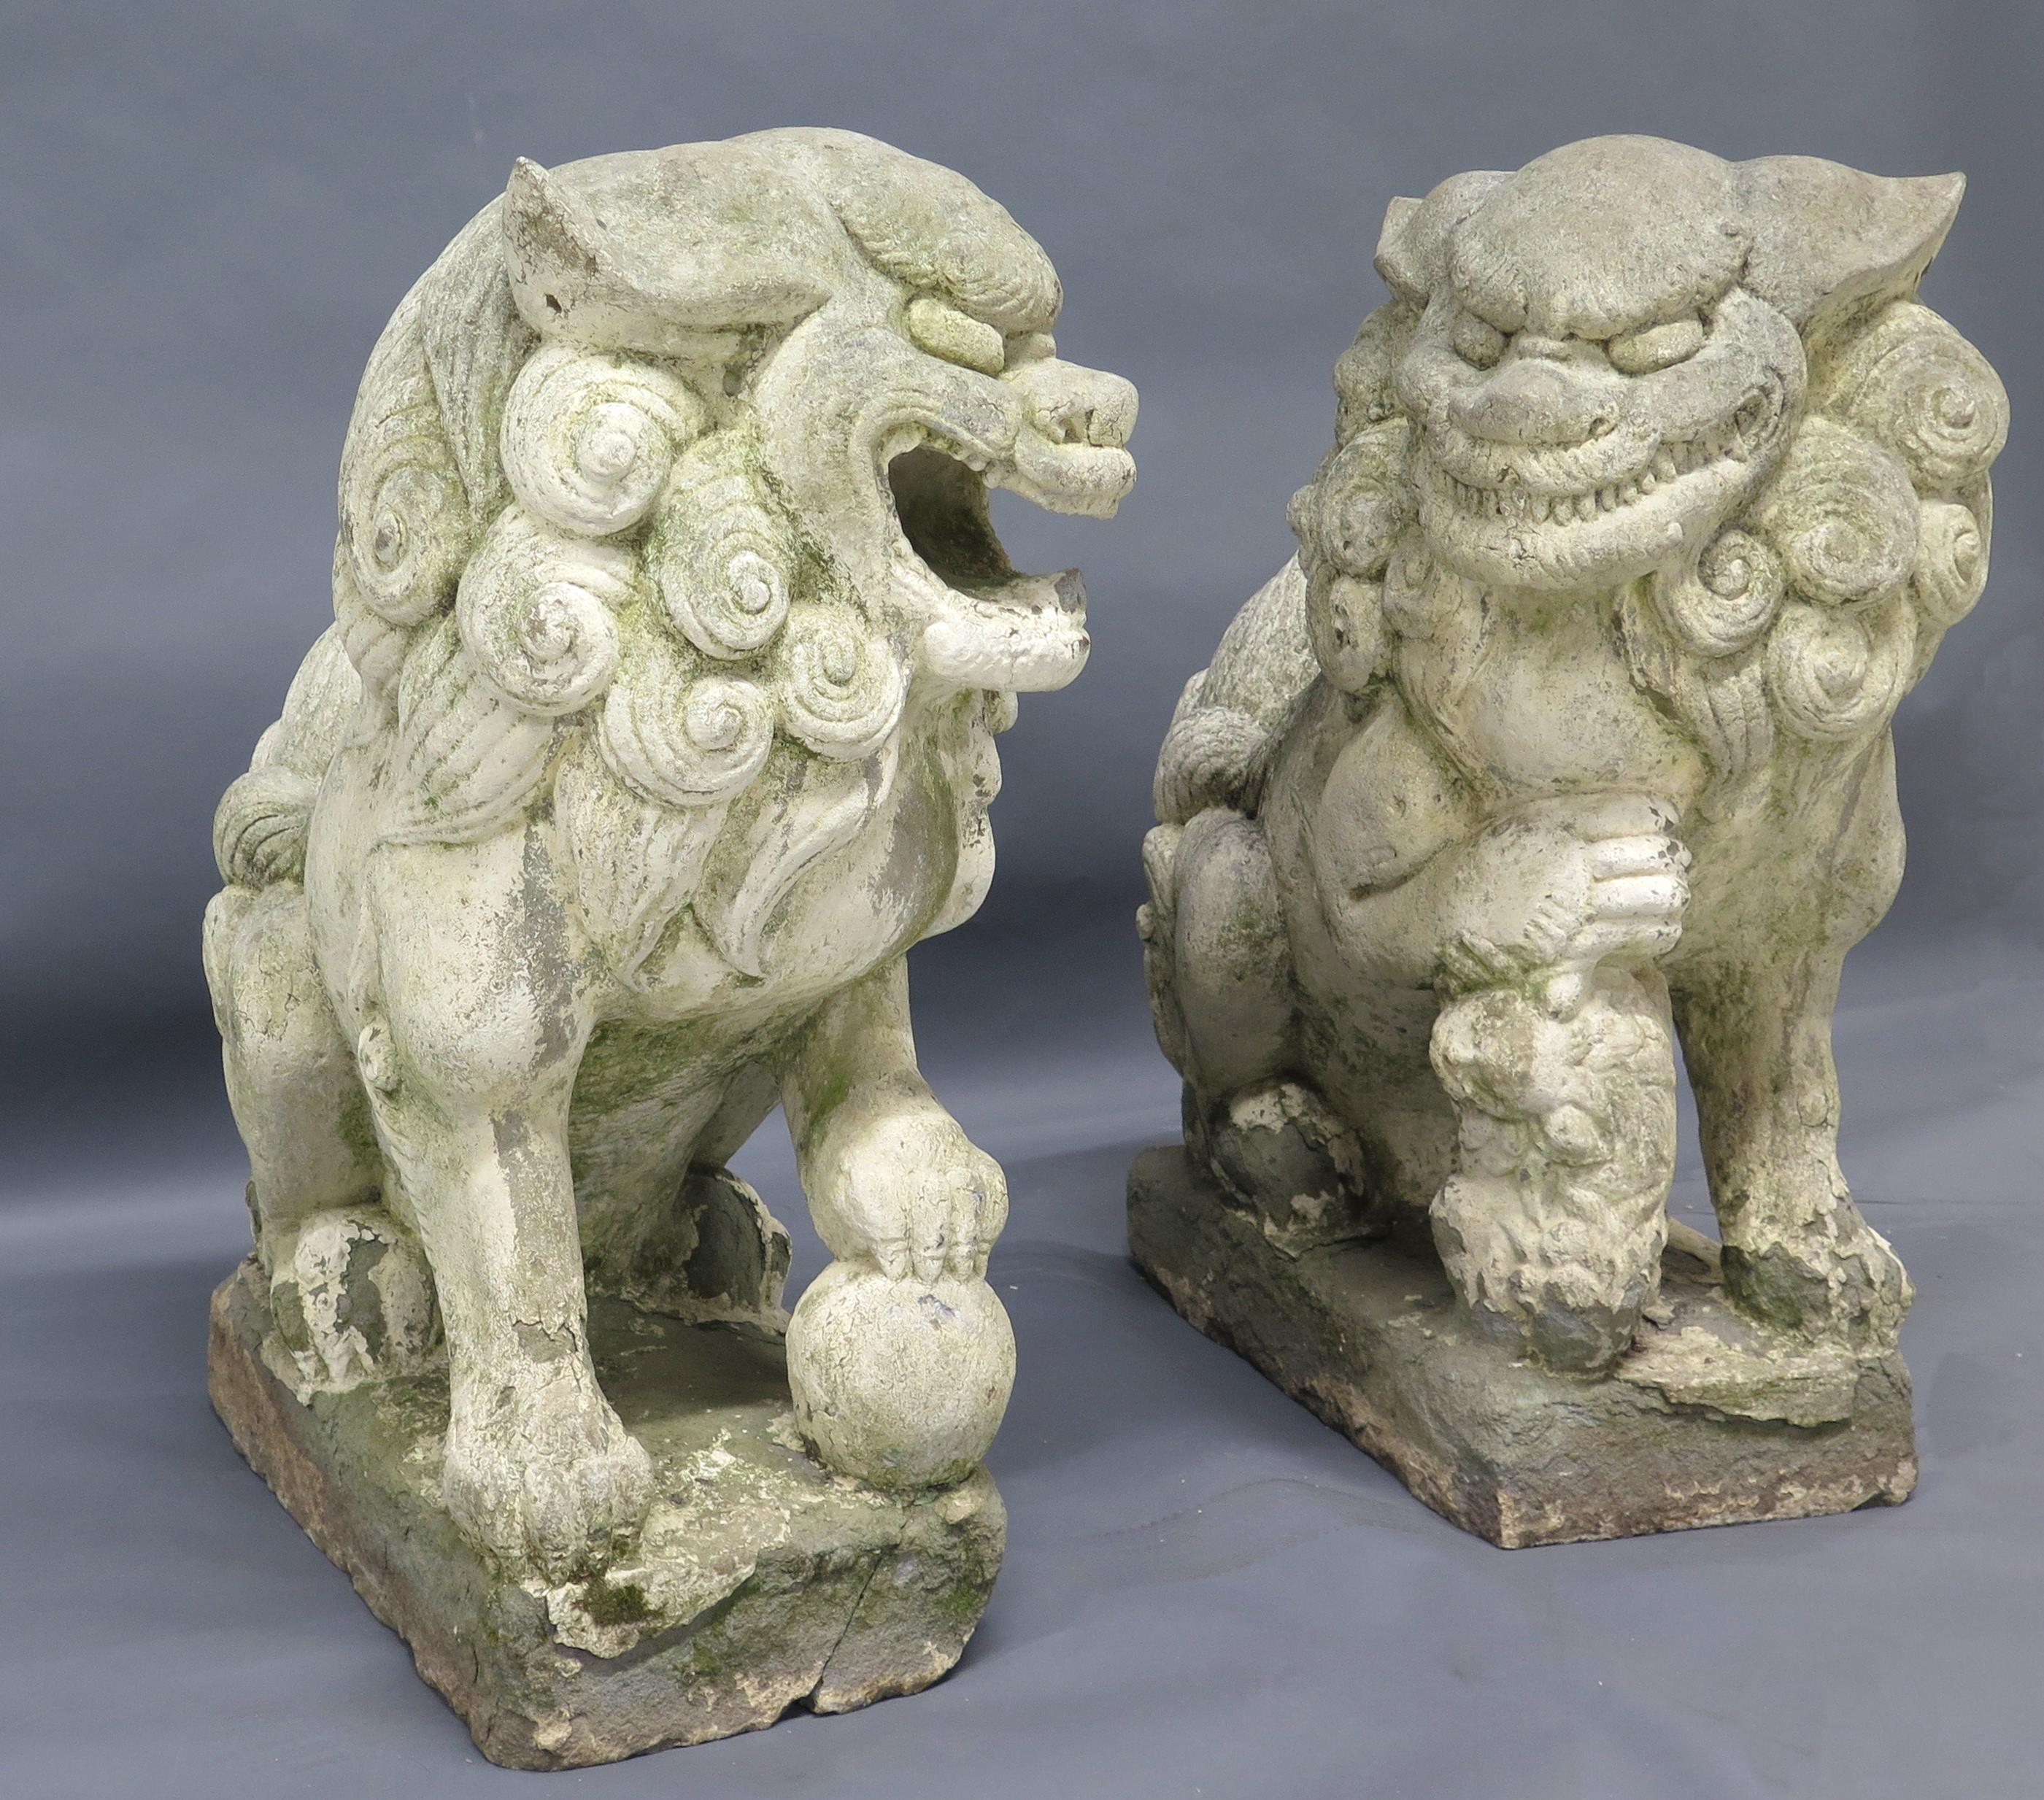 a pair of large scale, well carved stone Chinese Foo Dogs / Temple Lions, these are carved out of stone and are traditional Chinese architectural ornaments, China, circa 1920